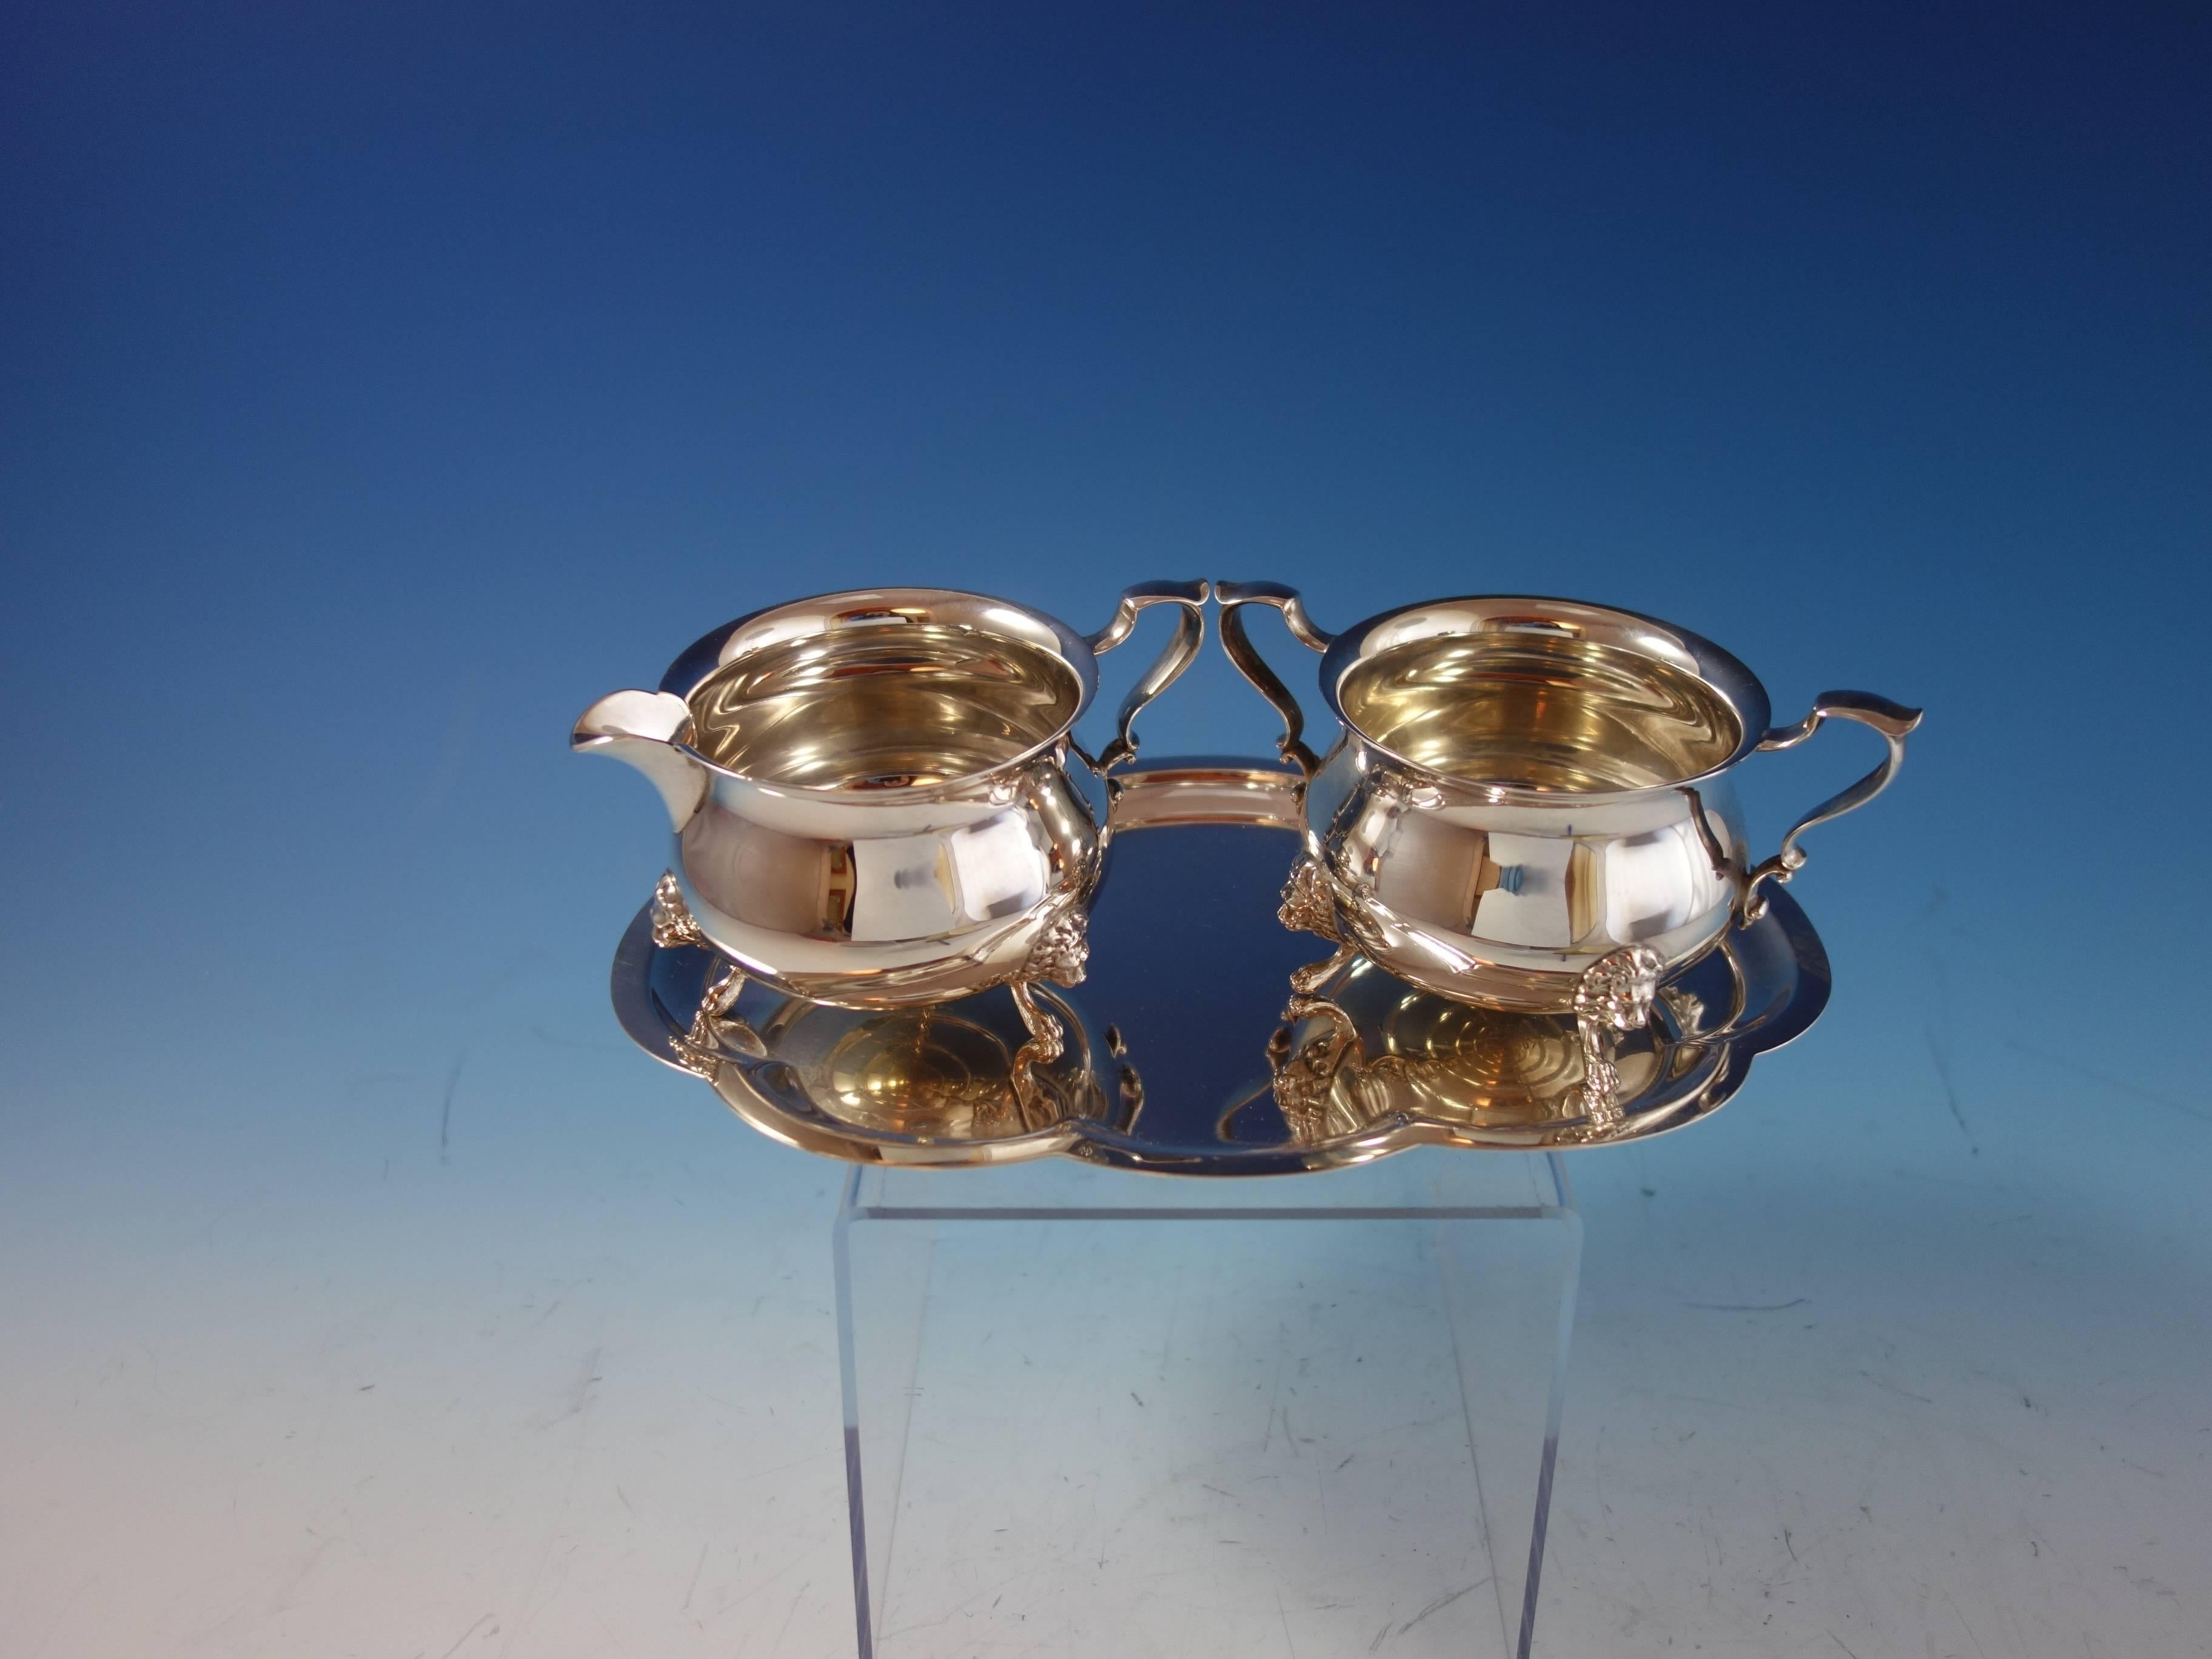 Marvelous Georgian by Poole three-piece sterling silver set that includes a creamer, sugar, and a tray. The sugar and creamer have applied lion head feet. All the pieces are marked with #33. The creamer measures 2 3/4